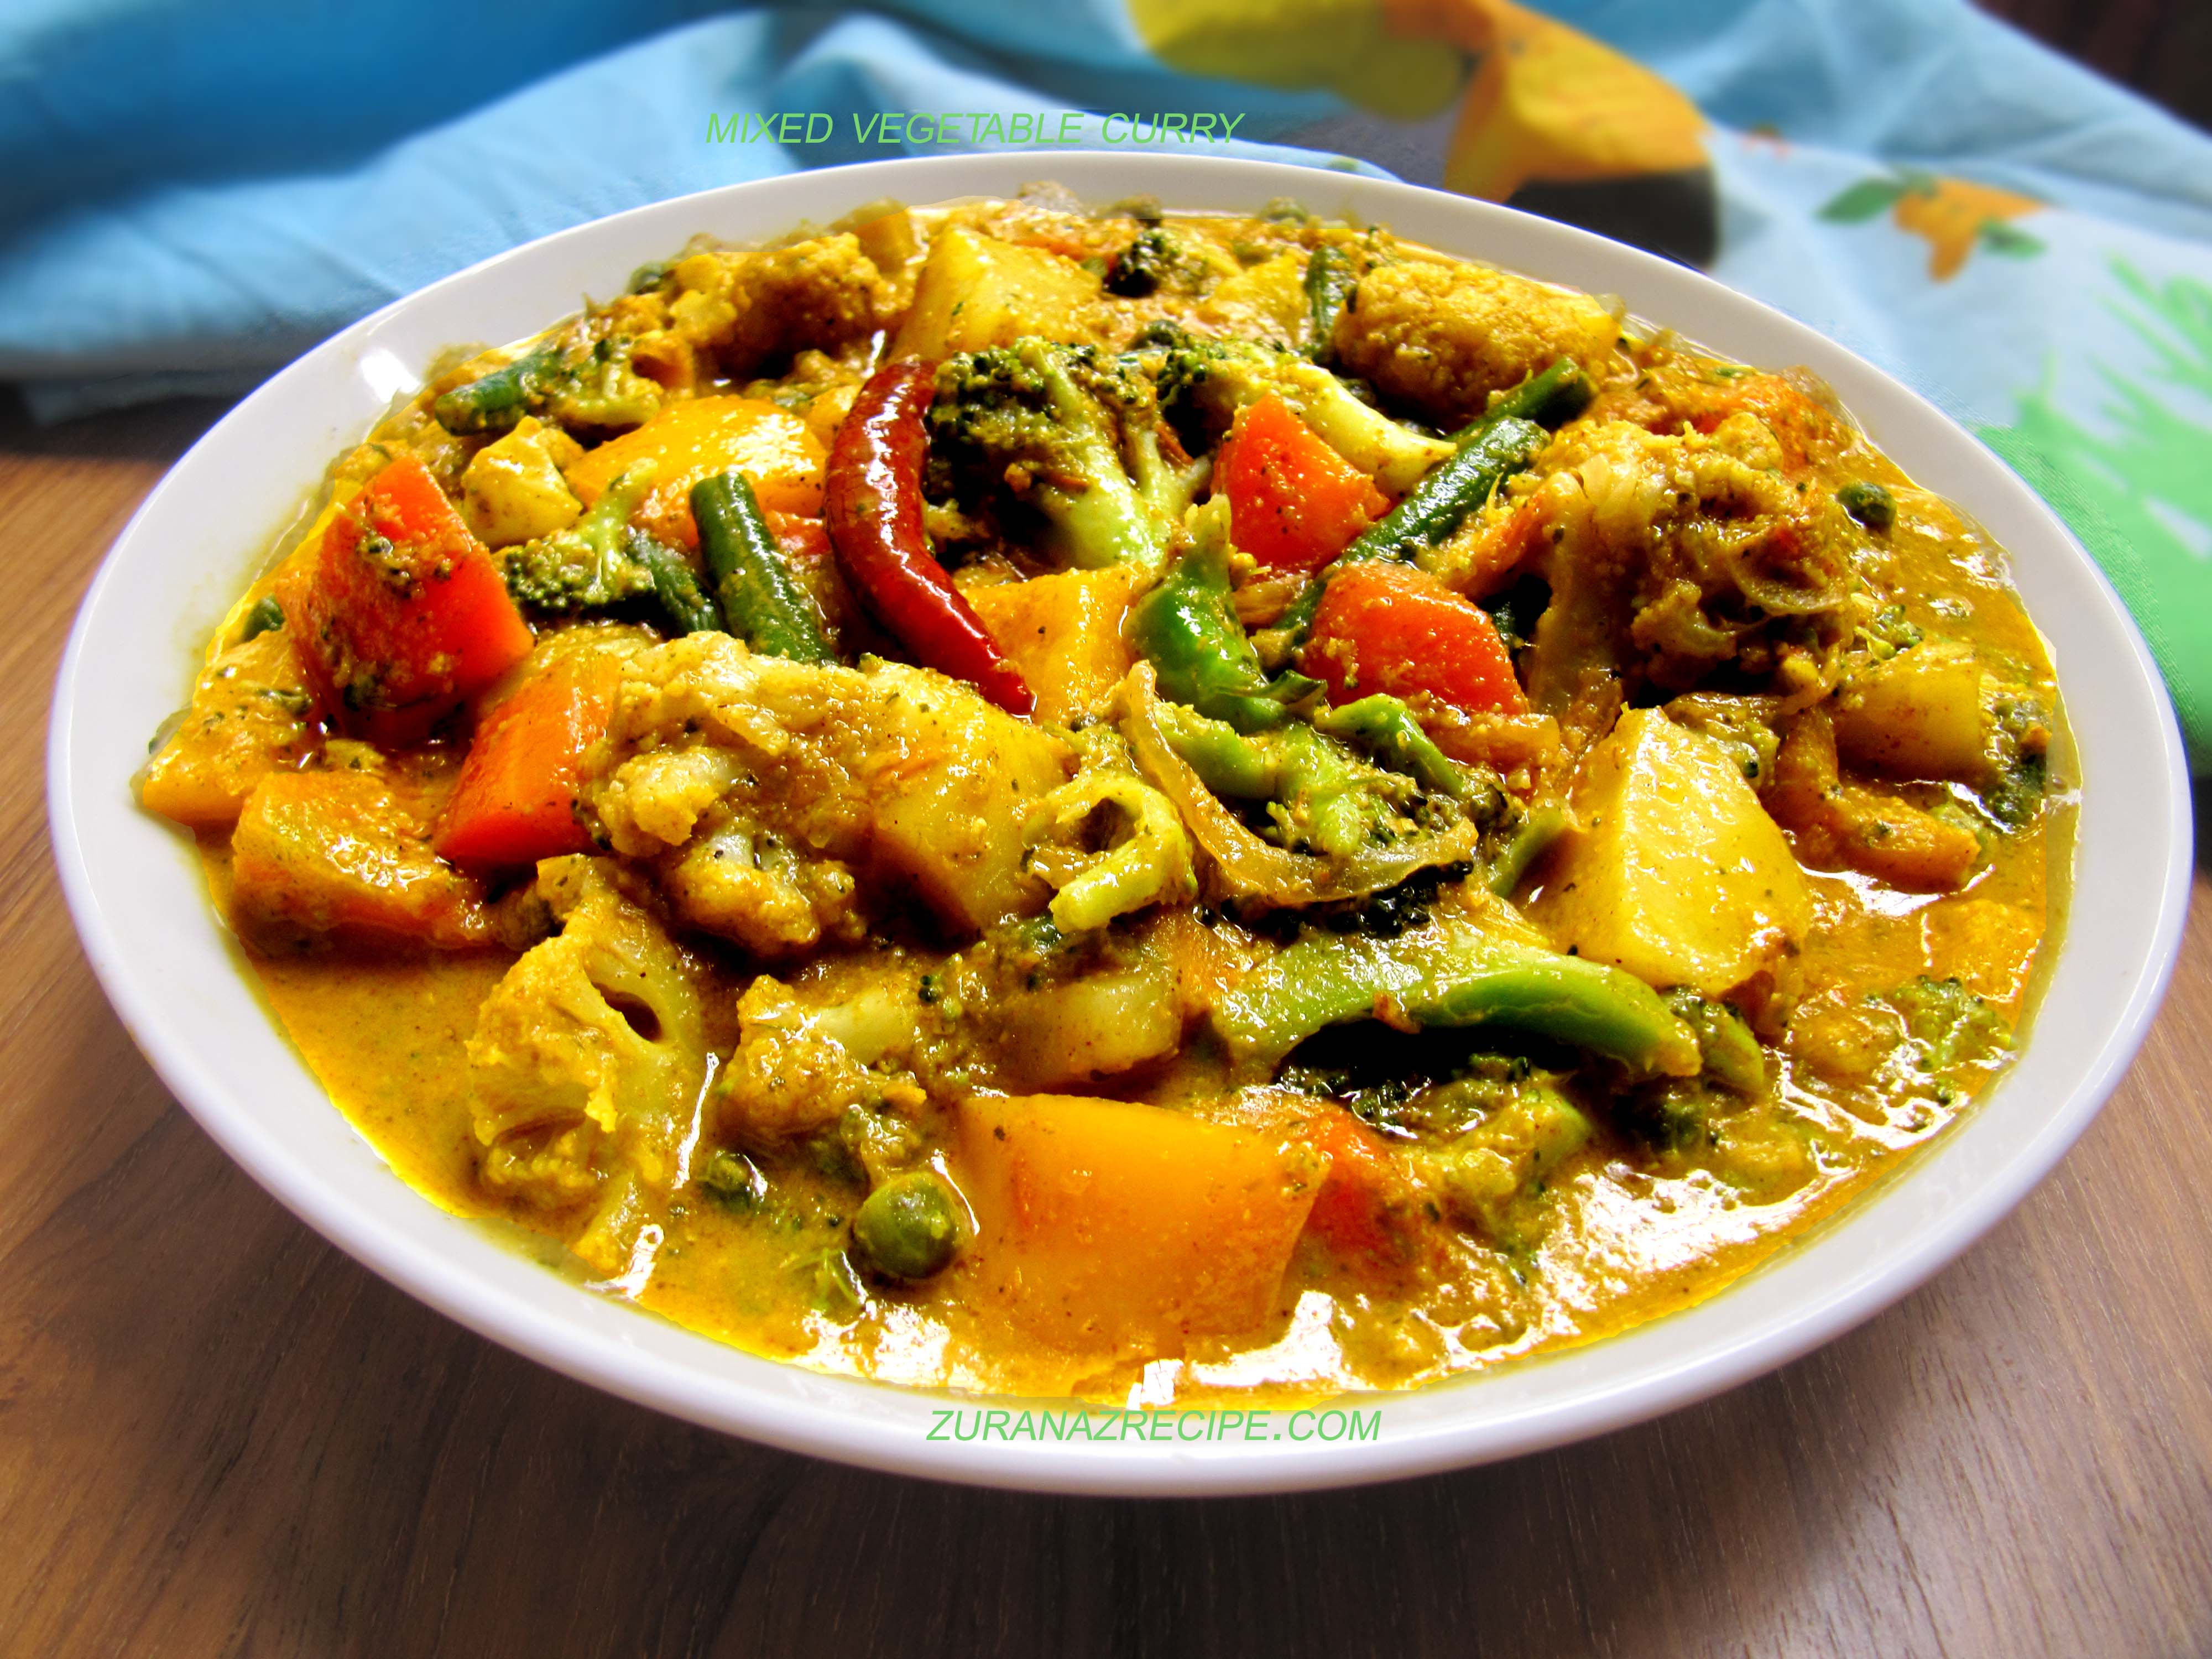  Mixed Vegetable Curry 